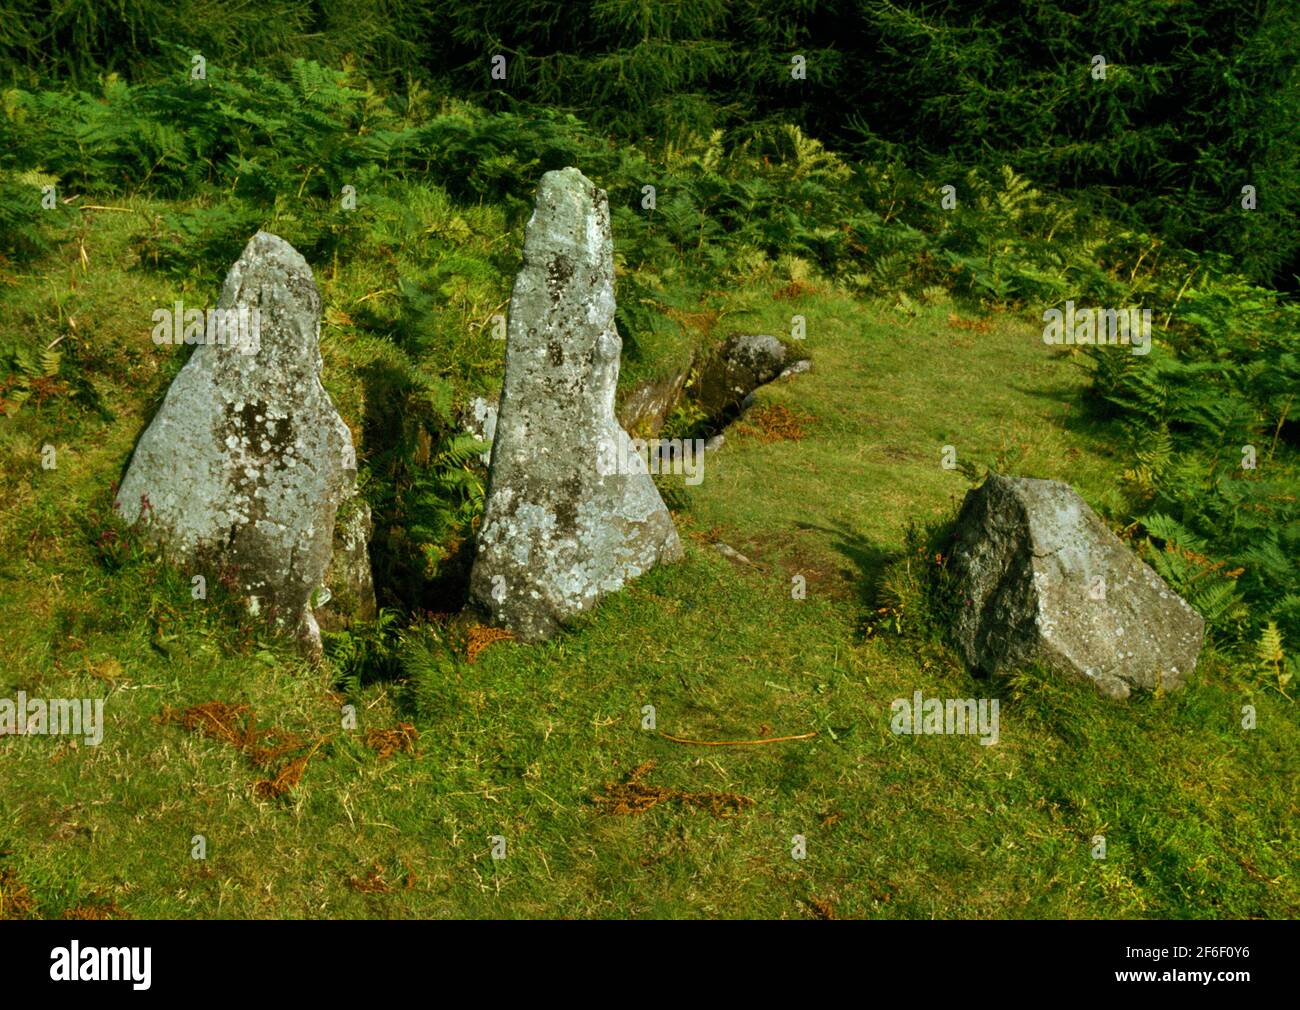 View N of Monamore Neolithic chambered tomb, Arran, Scotland, UK, showing sandstone portals, segemented burial chamber & remains of a curving facade. Stock Photo